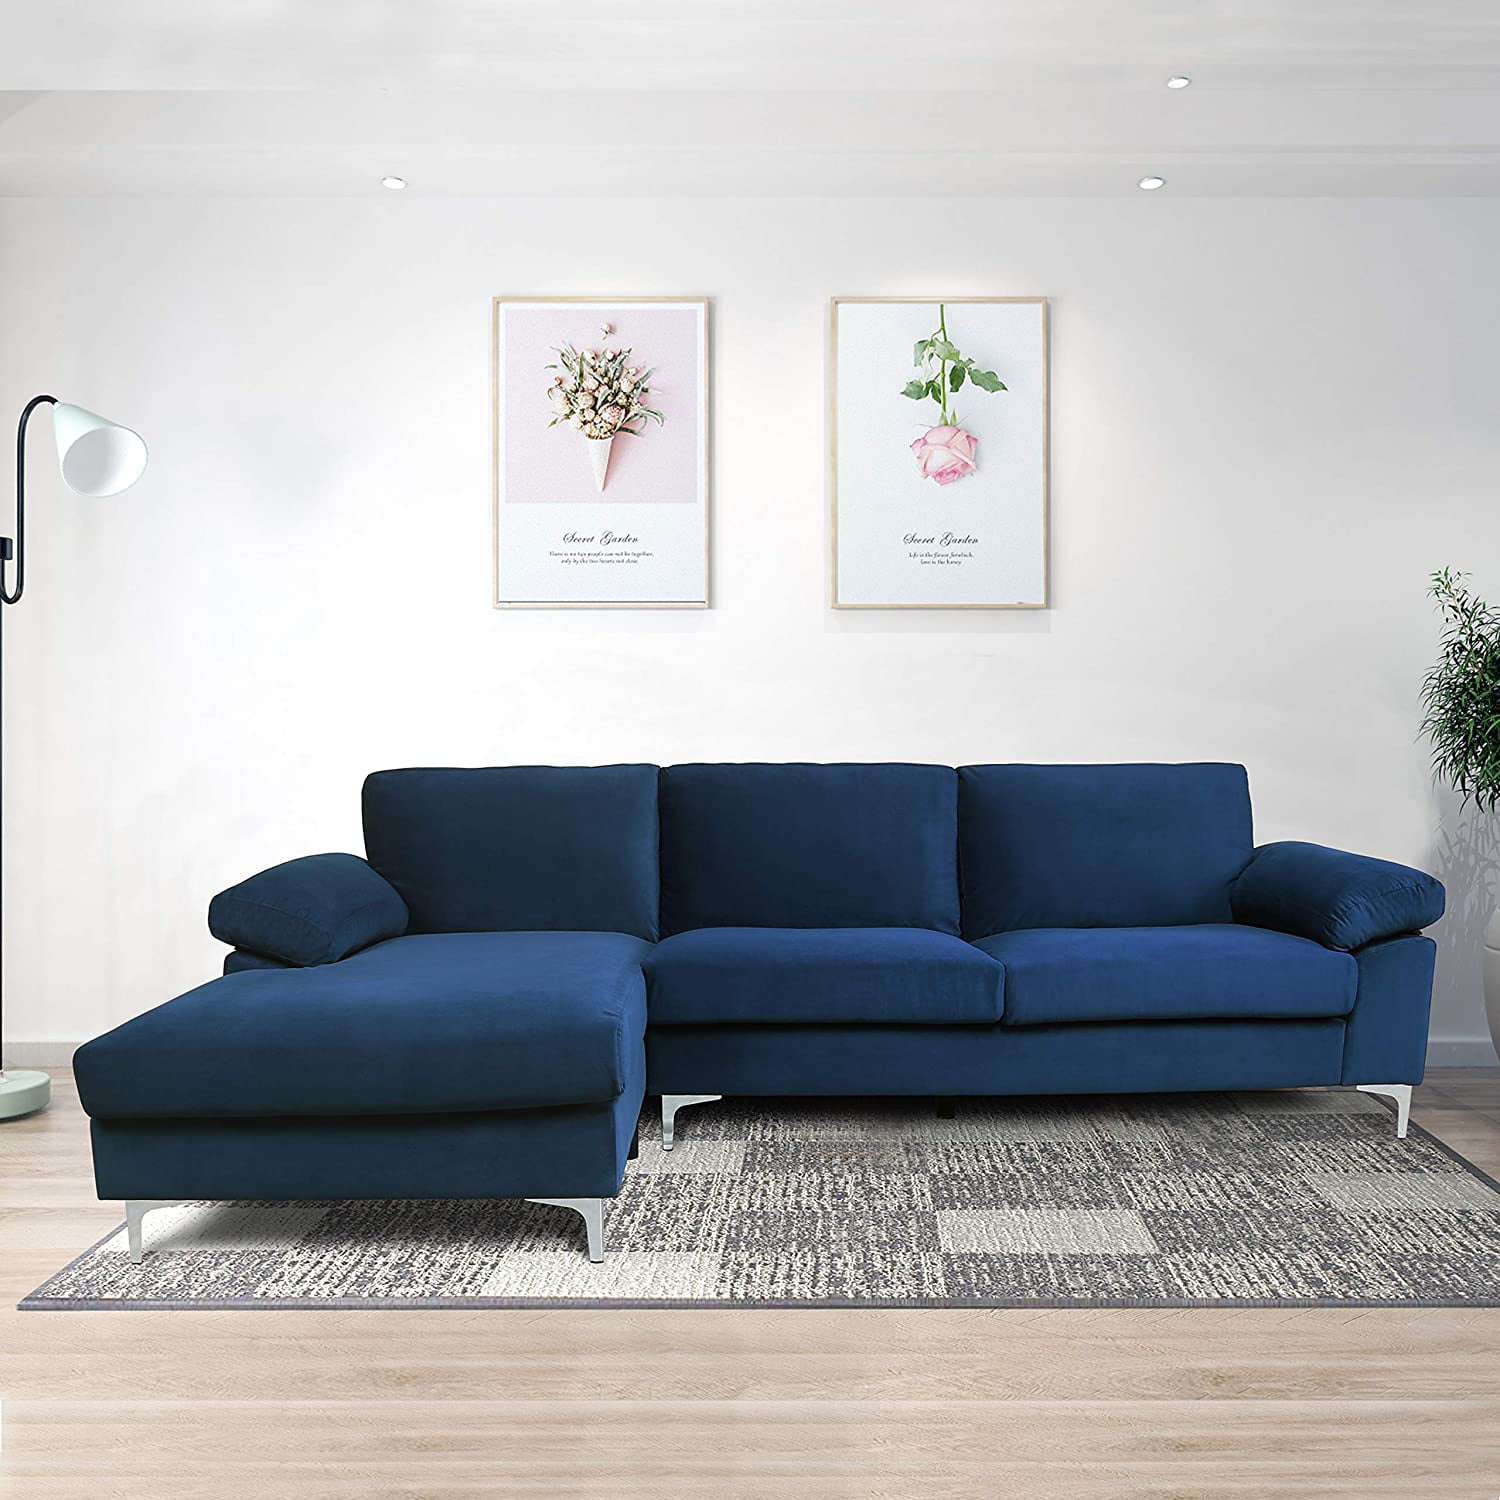 Powstro Velvet Fabric Sectional Sofa Set Corner Couch With Chaise Lounge Living Room Furniture Navy Blue Walmartcom Walmartcom